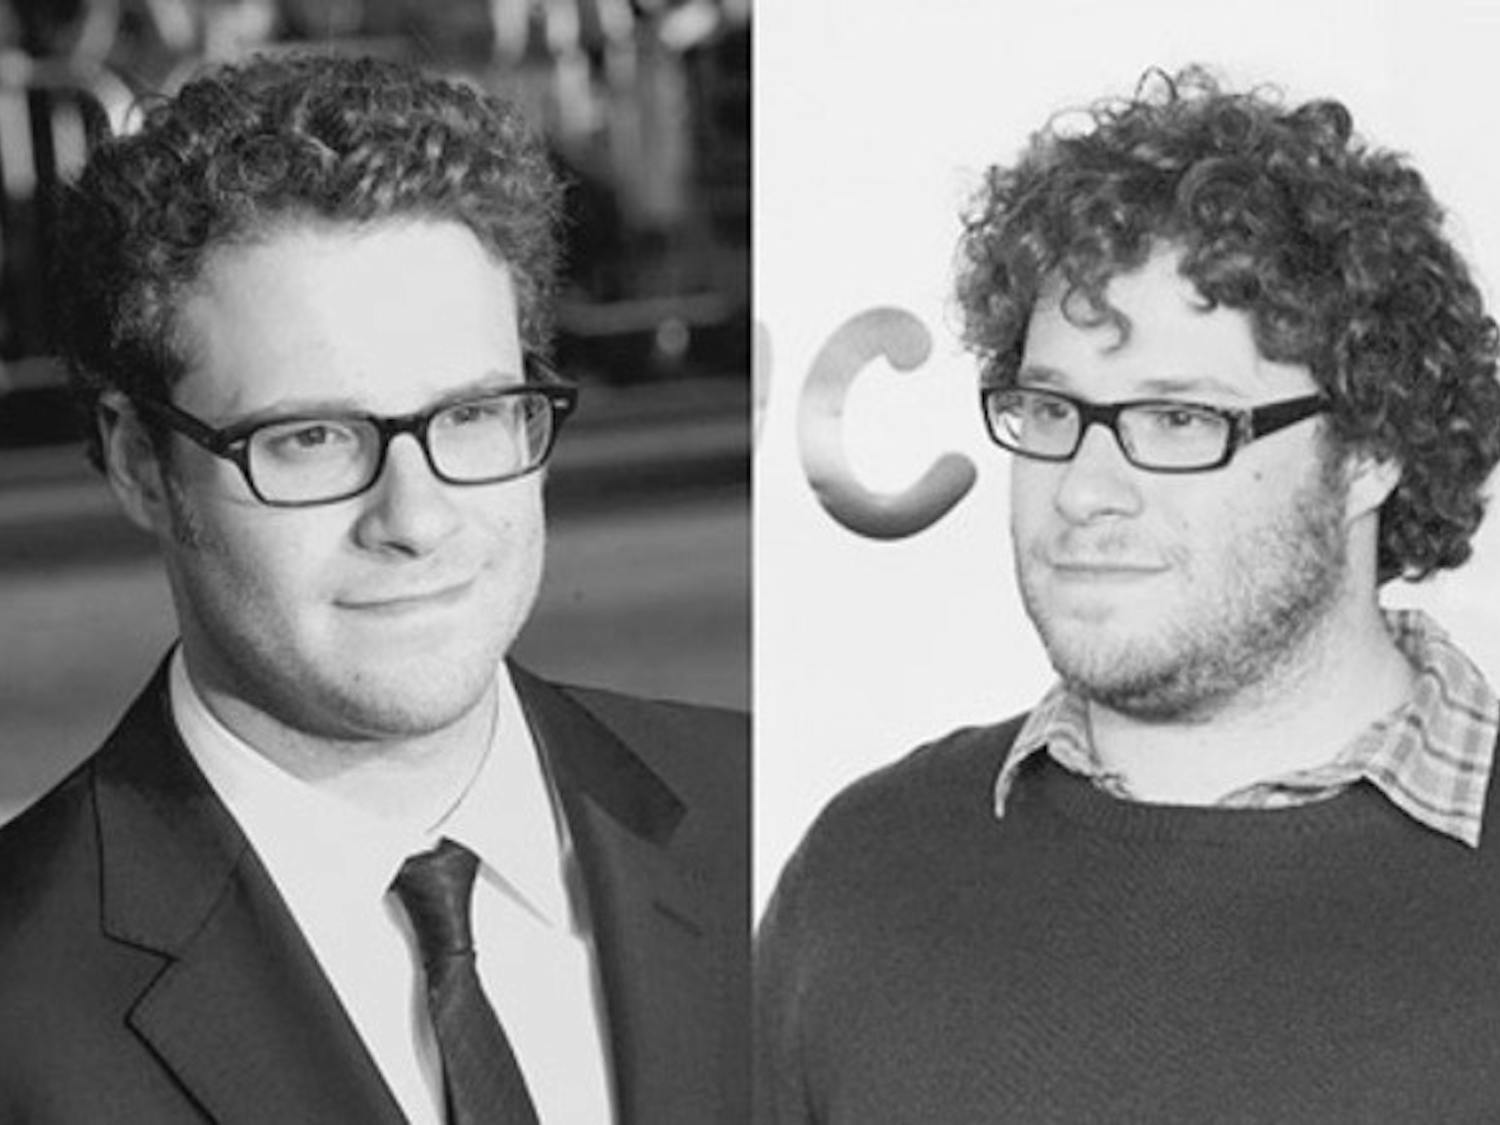 Seth Rogen at the premieres of 